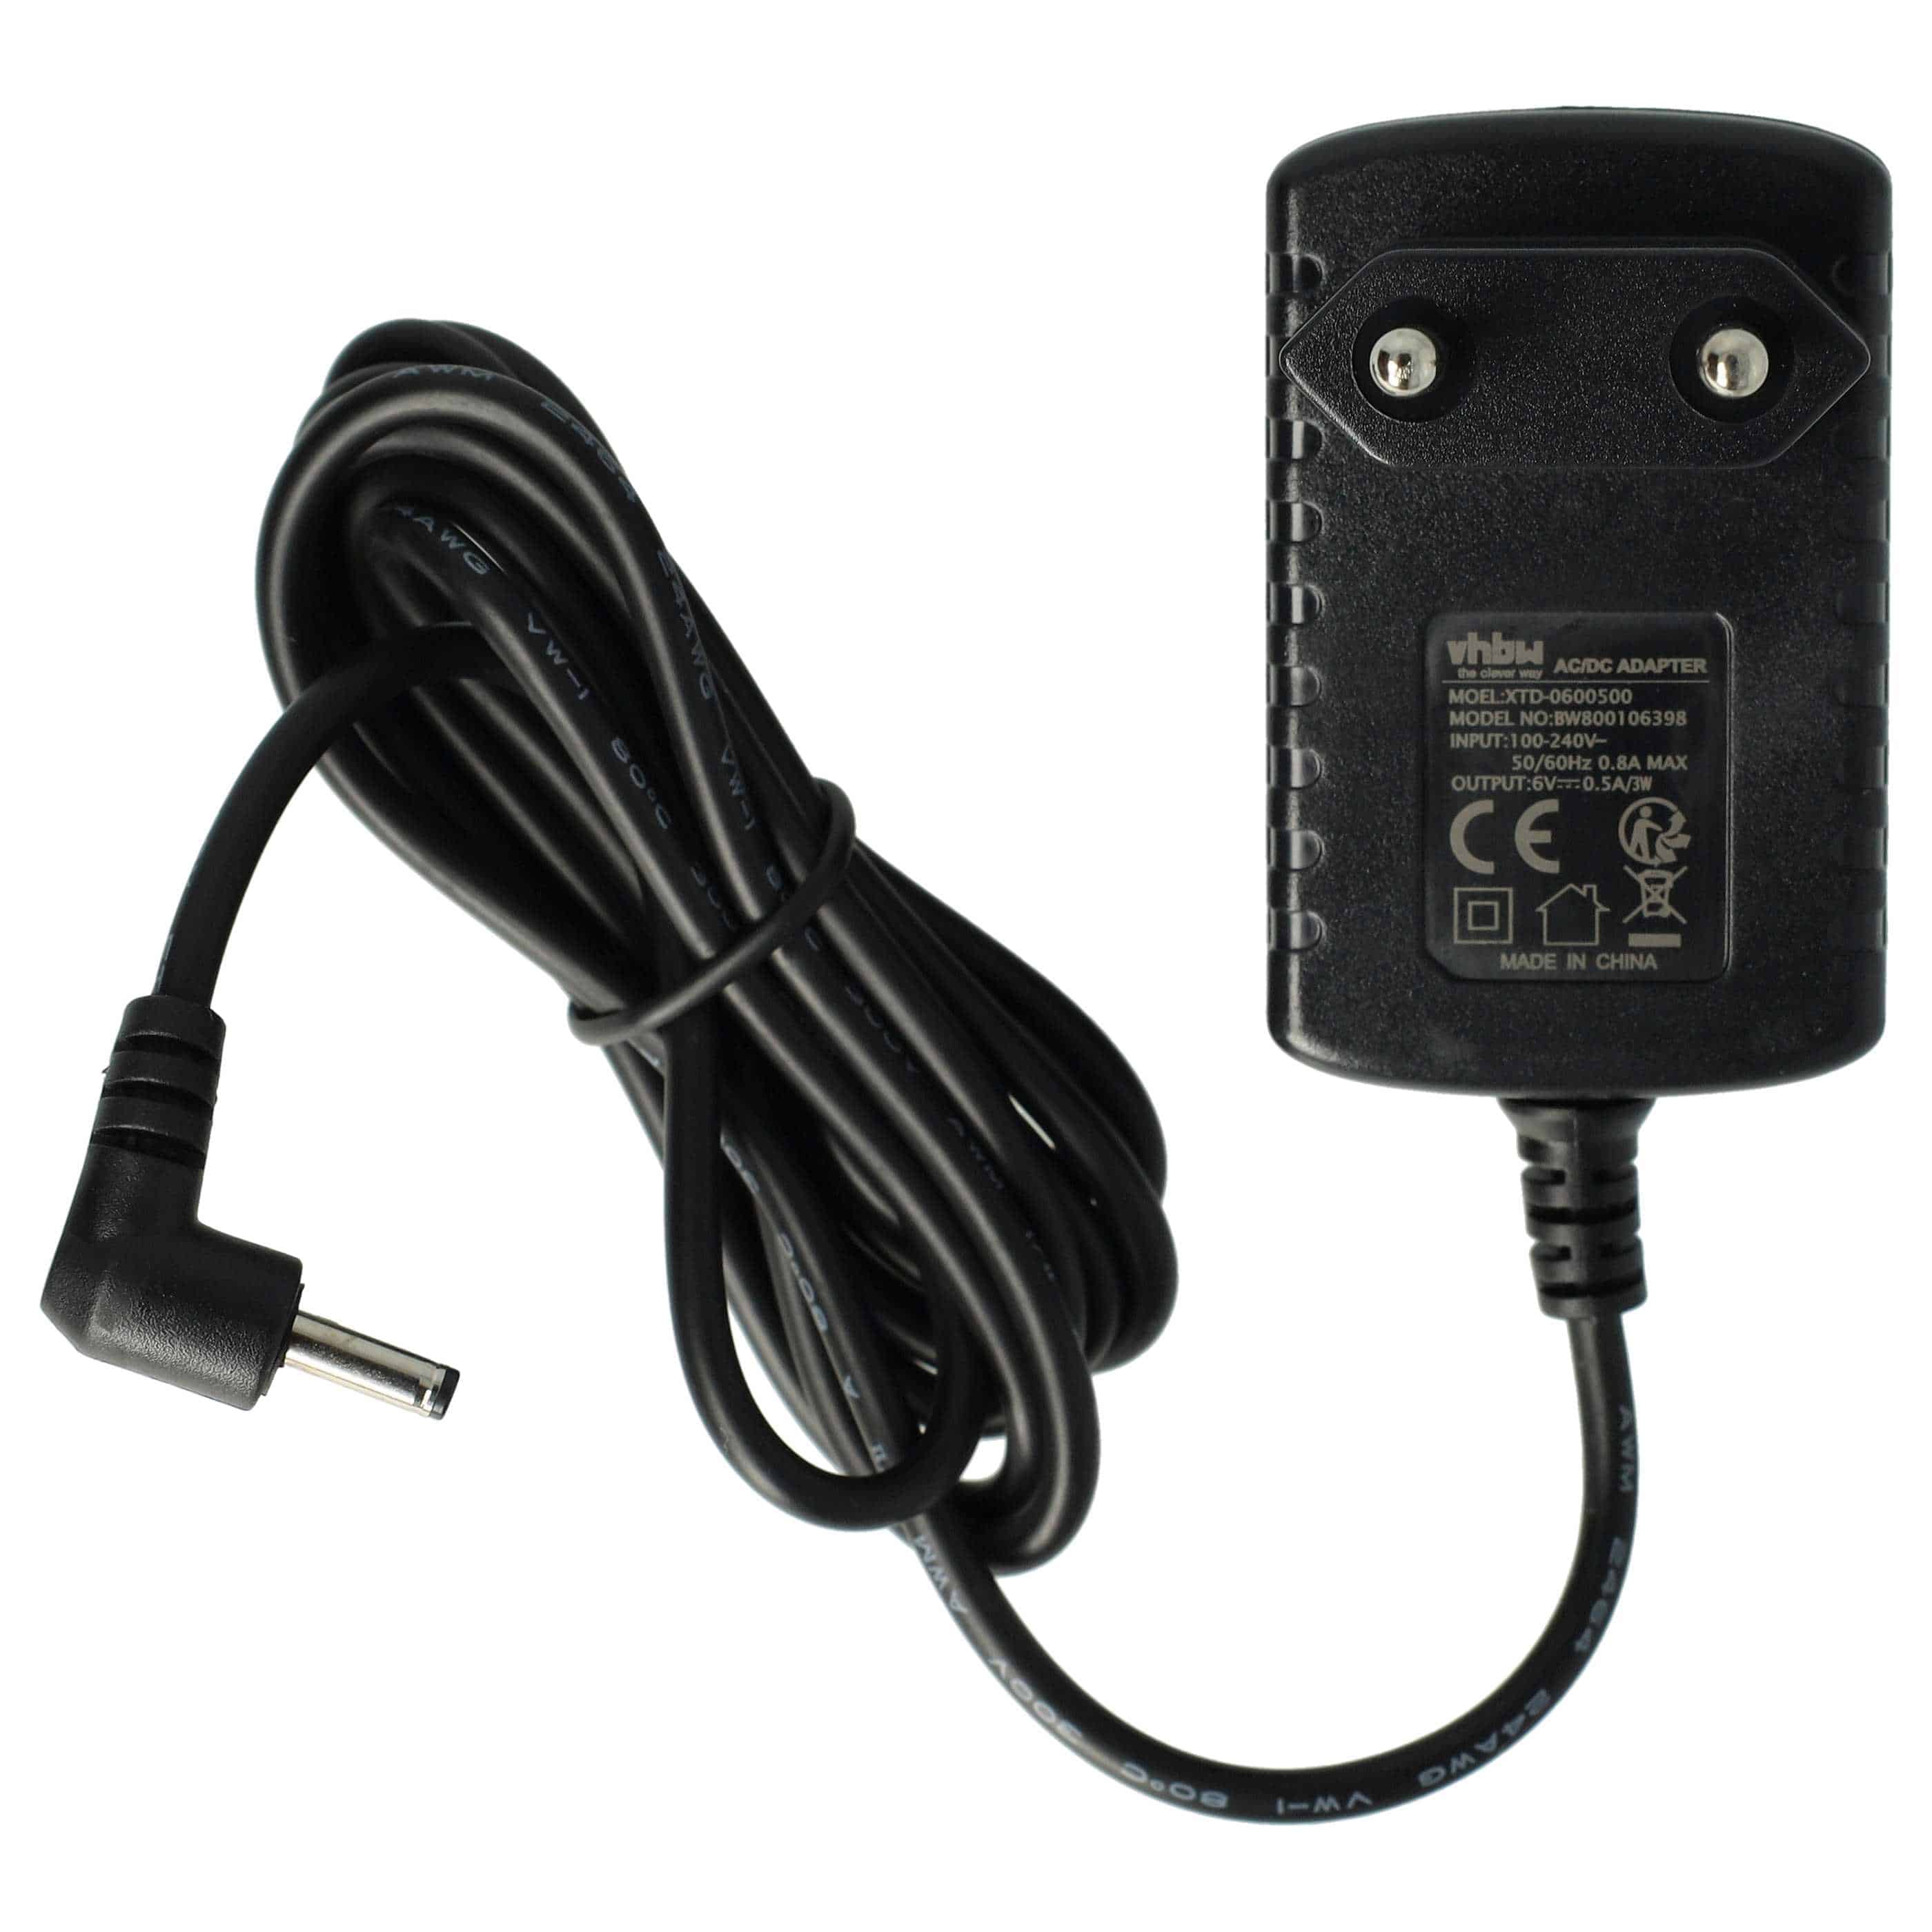 Mains Power Adapter replaces Philips SSW-1920EU-2 for Landline Telephone Charging Station